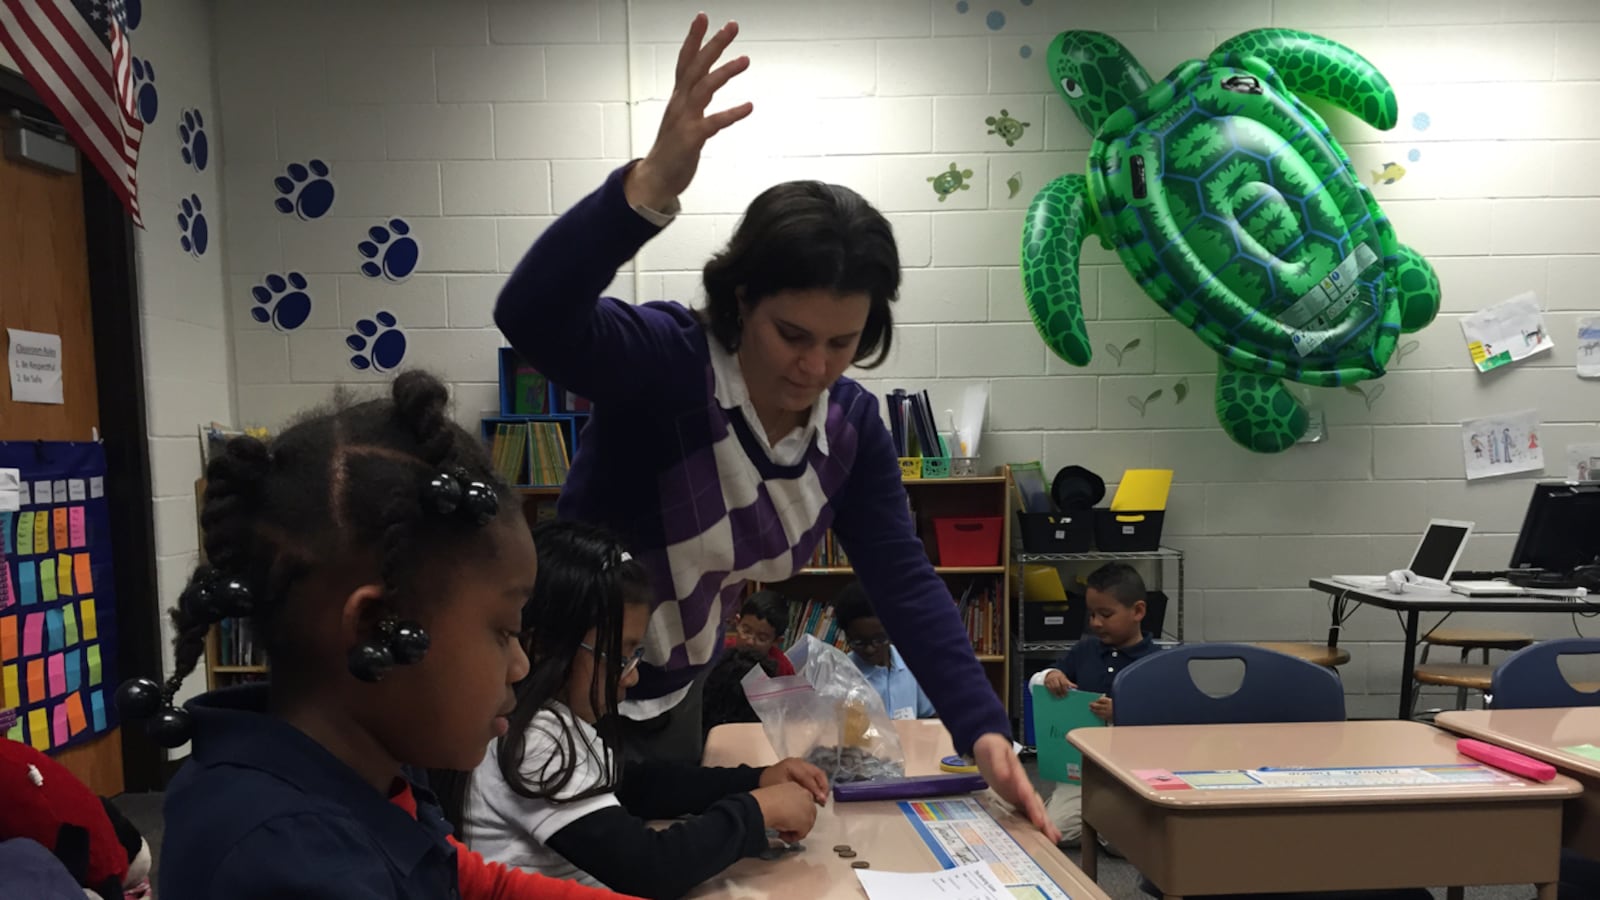 Shana Nissenbaum, a third-grade teacher at the now-closed Key Learning Community School, helps a group of students with a math activity on counting money.